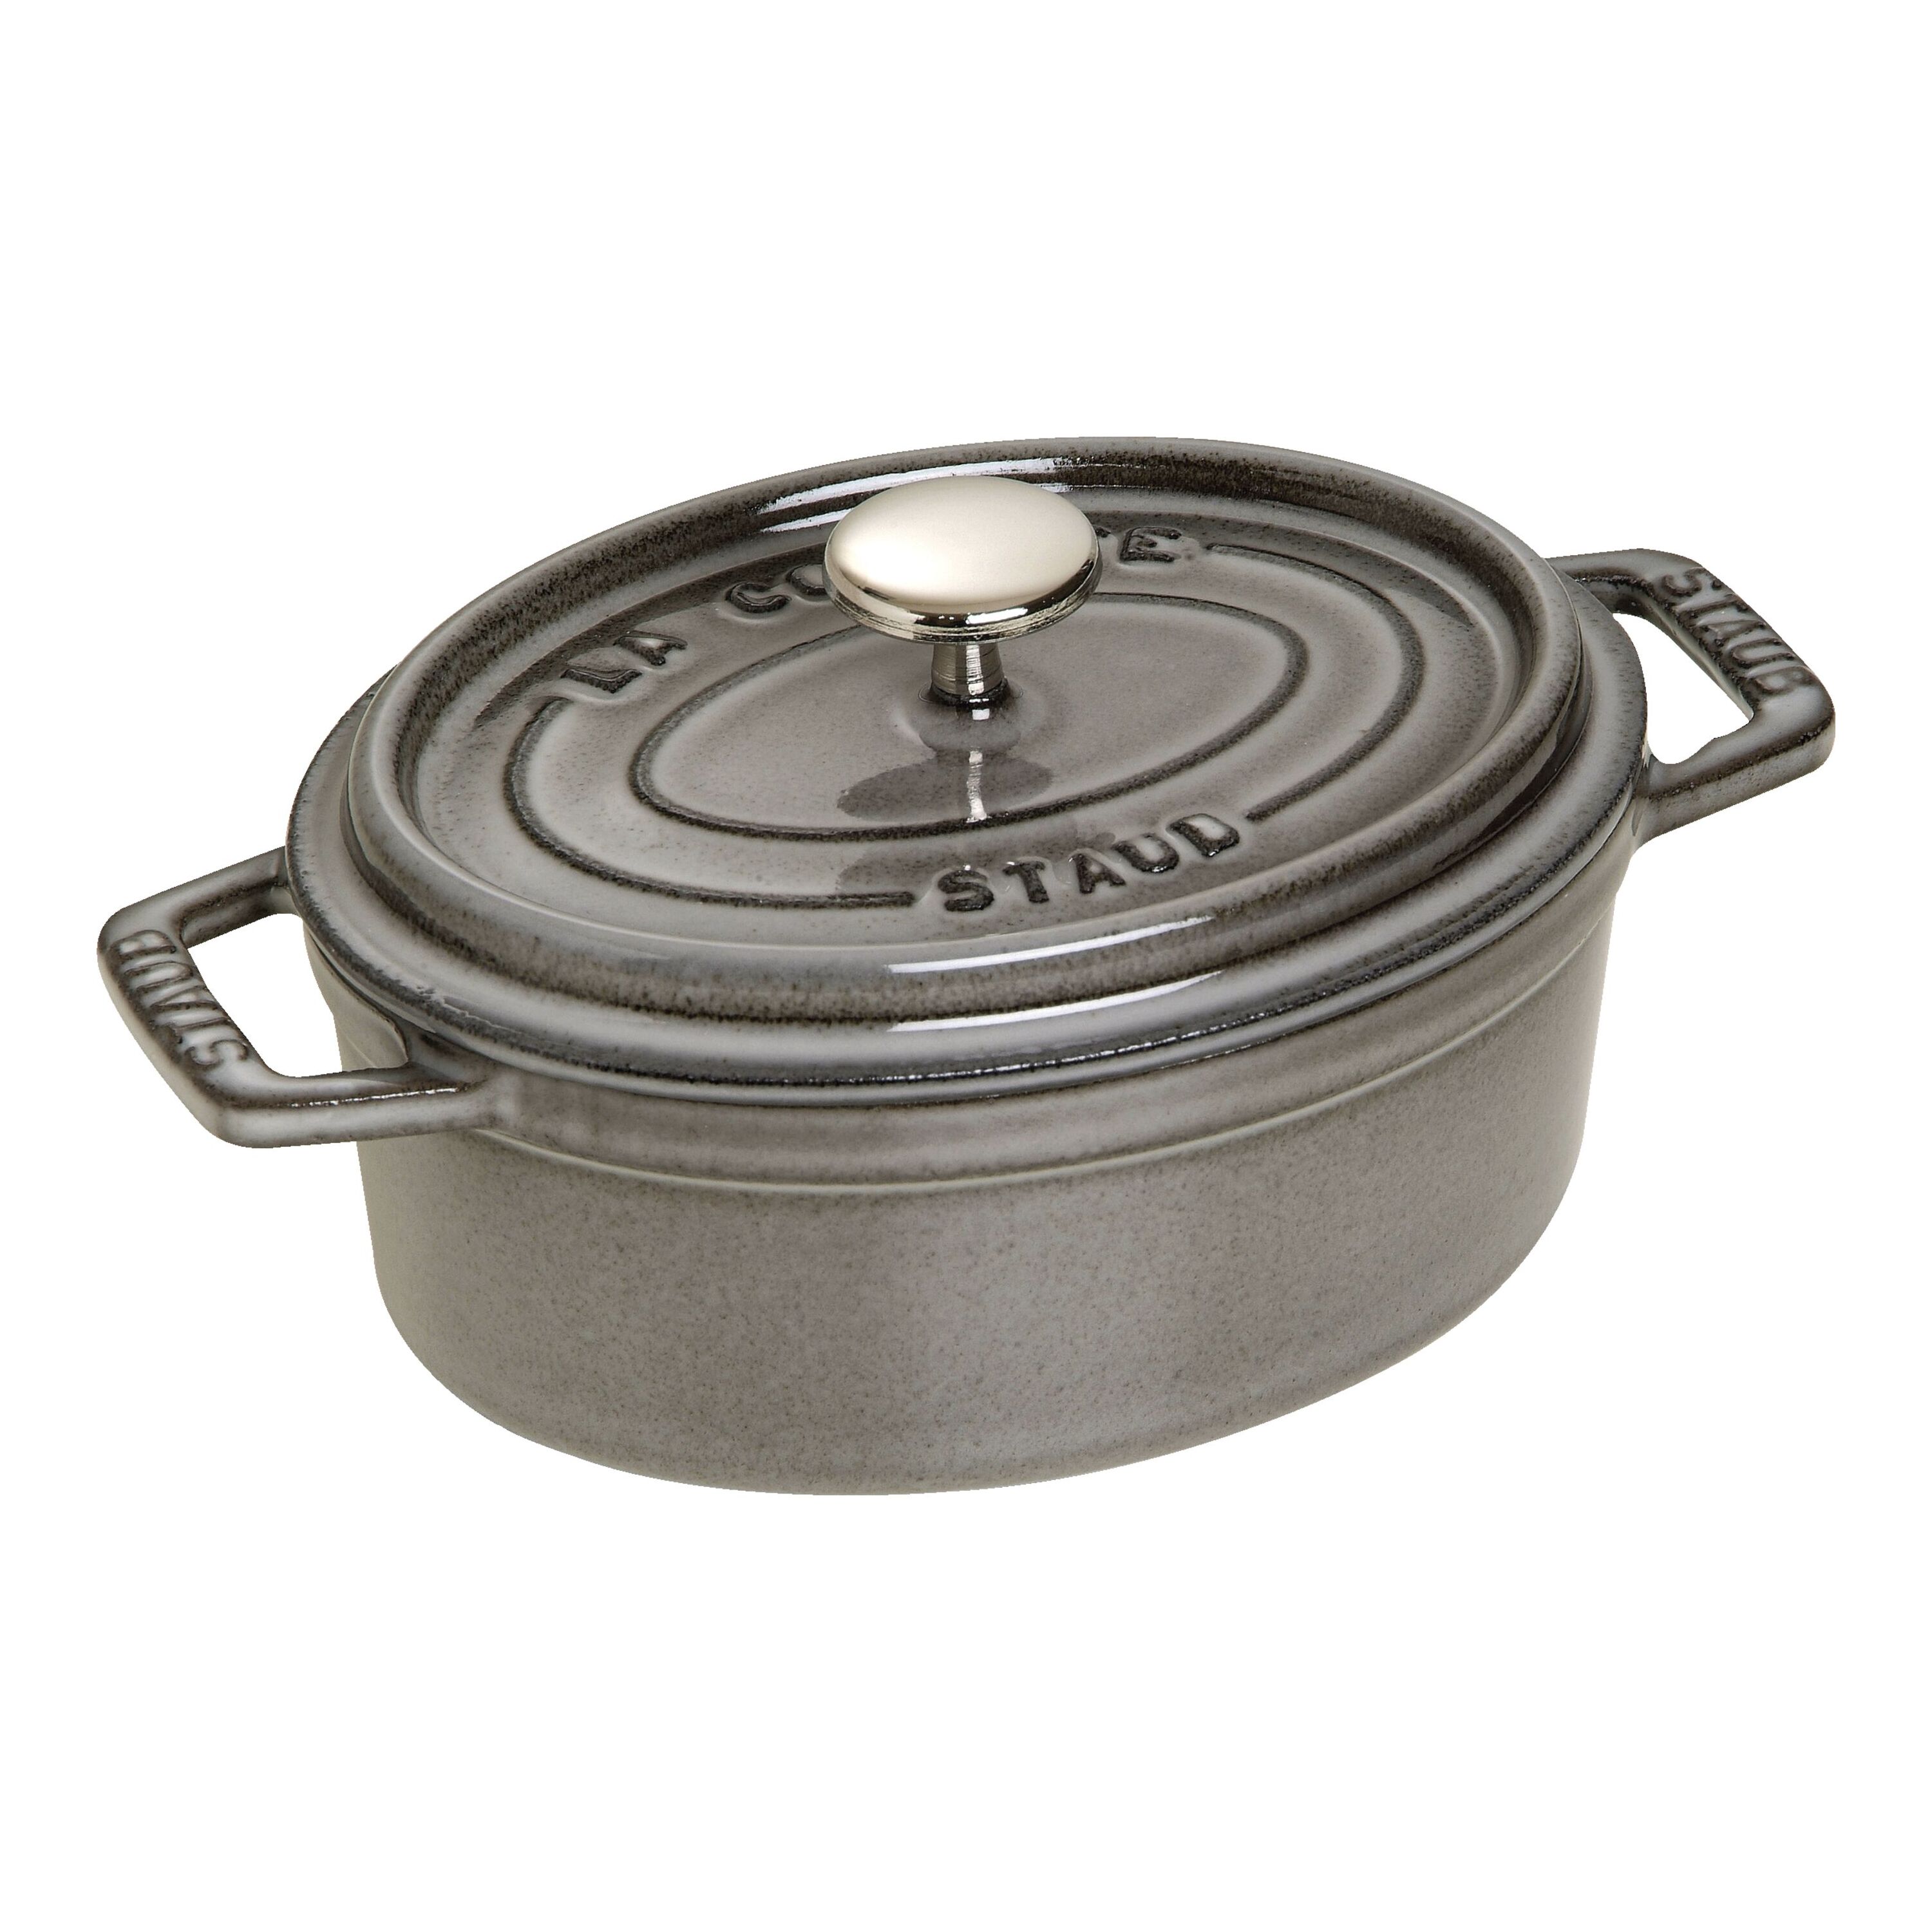 Buy Cocotte Staub Iron - Oval Cast Cocottes